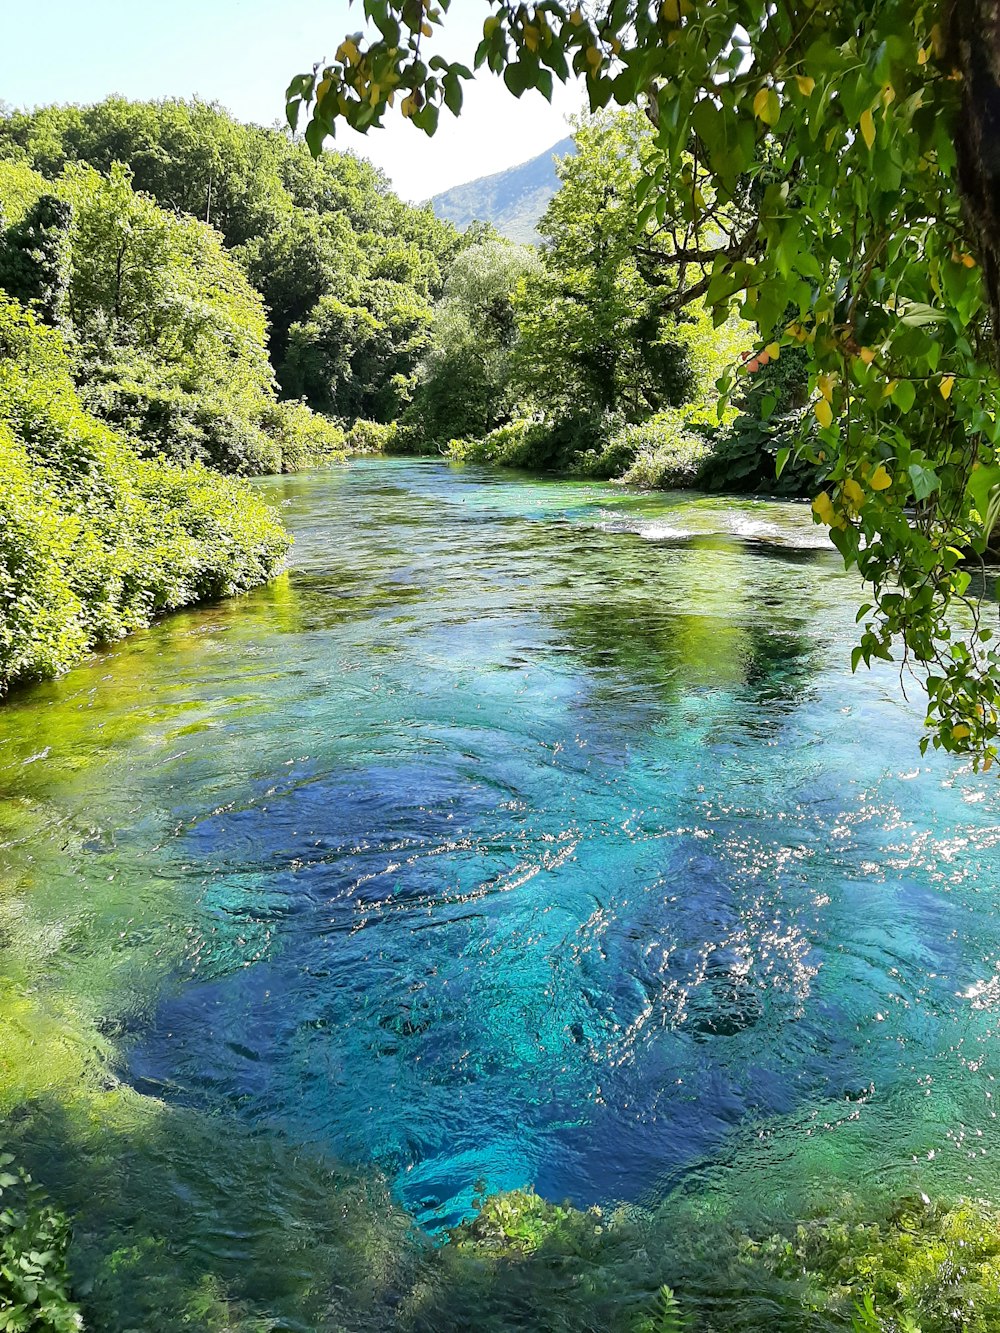 a river with blue water surrounded by trees